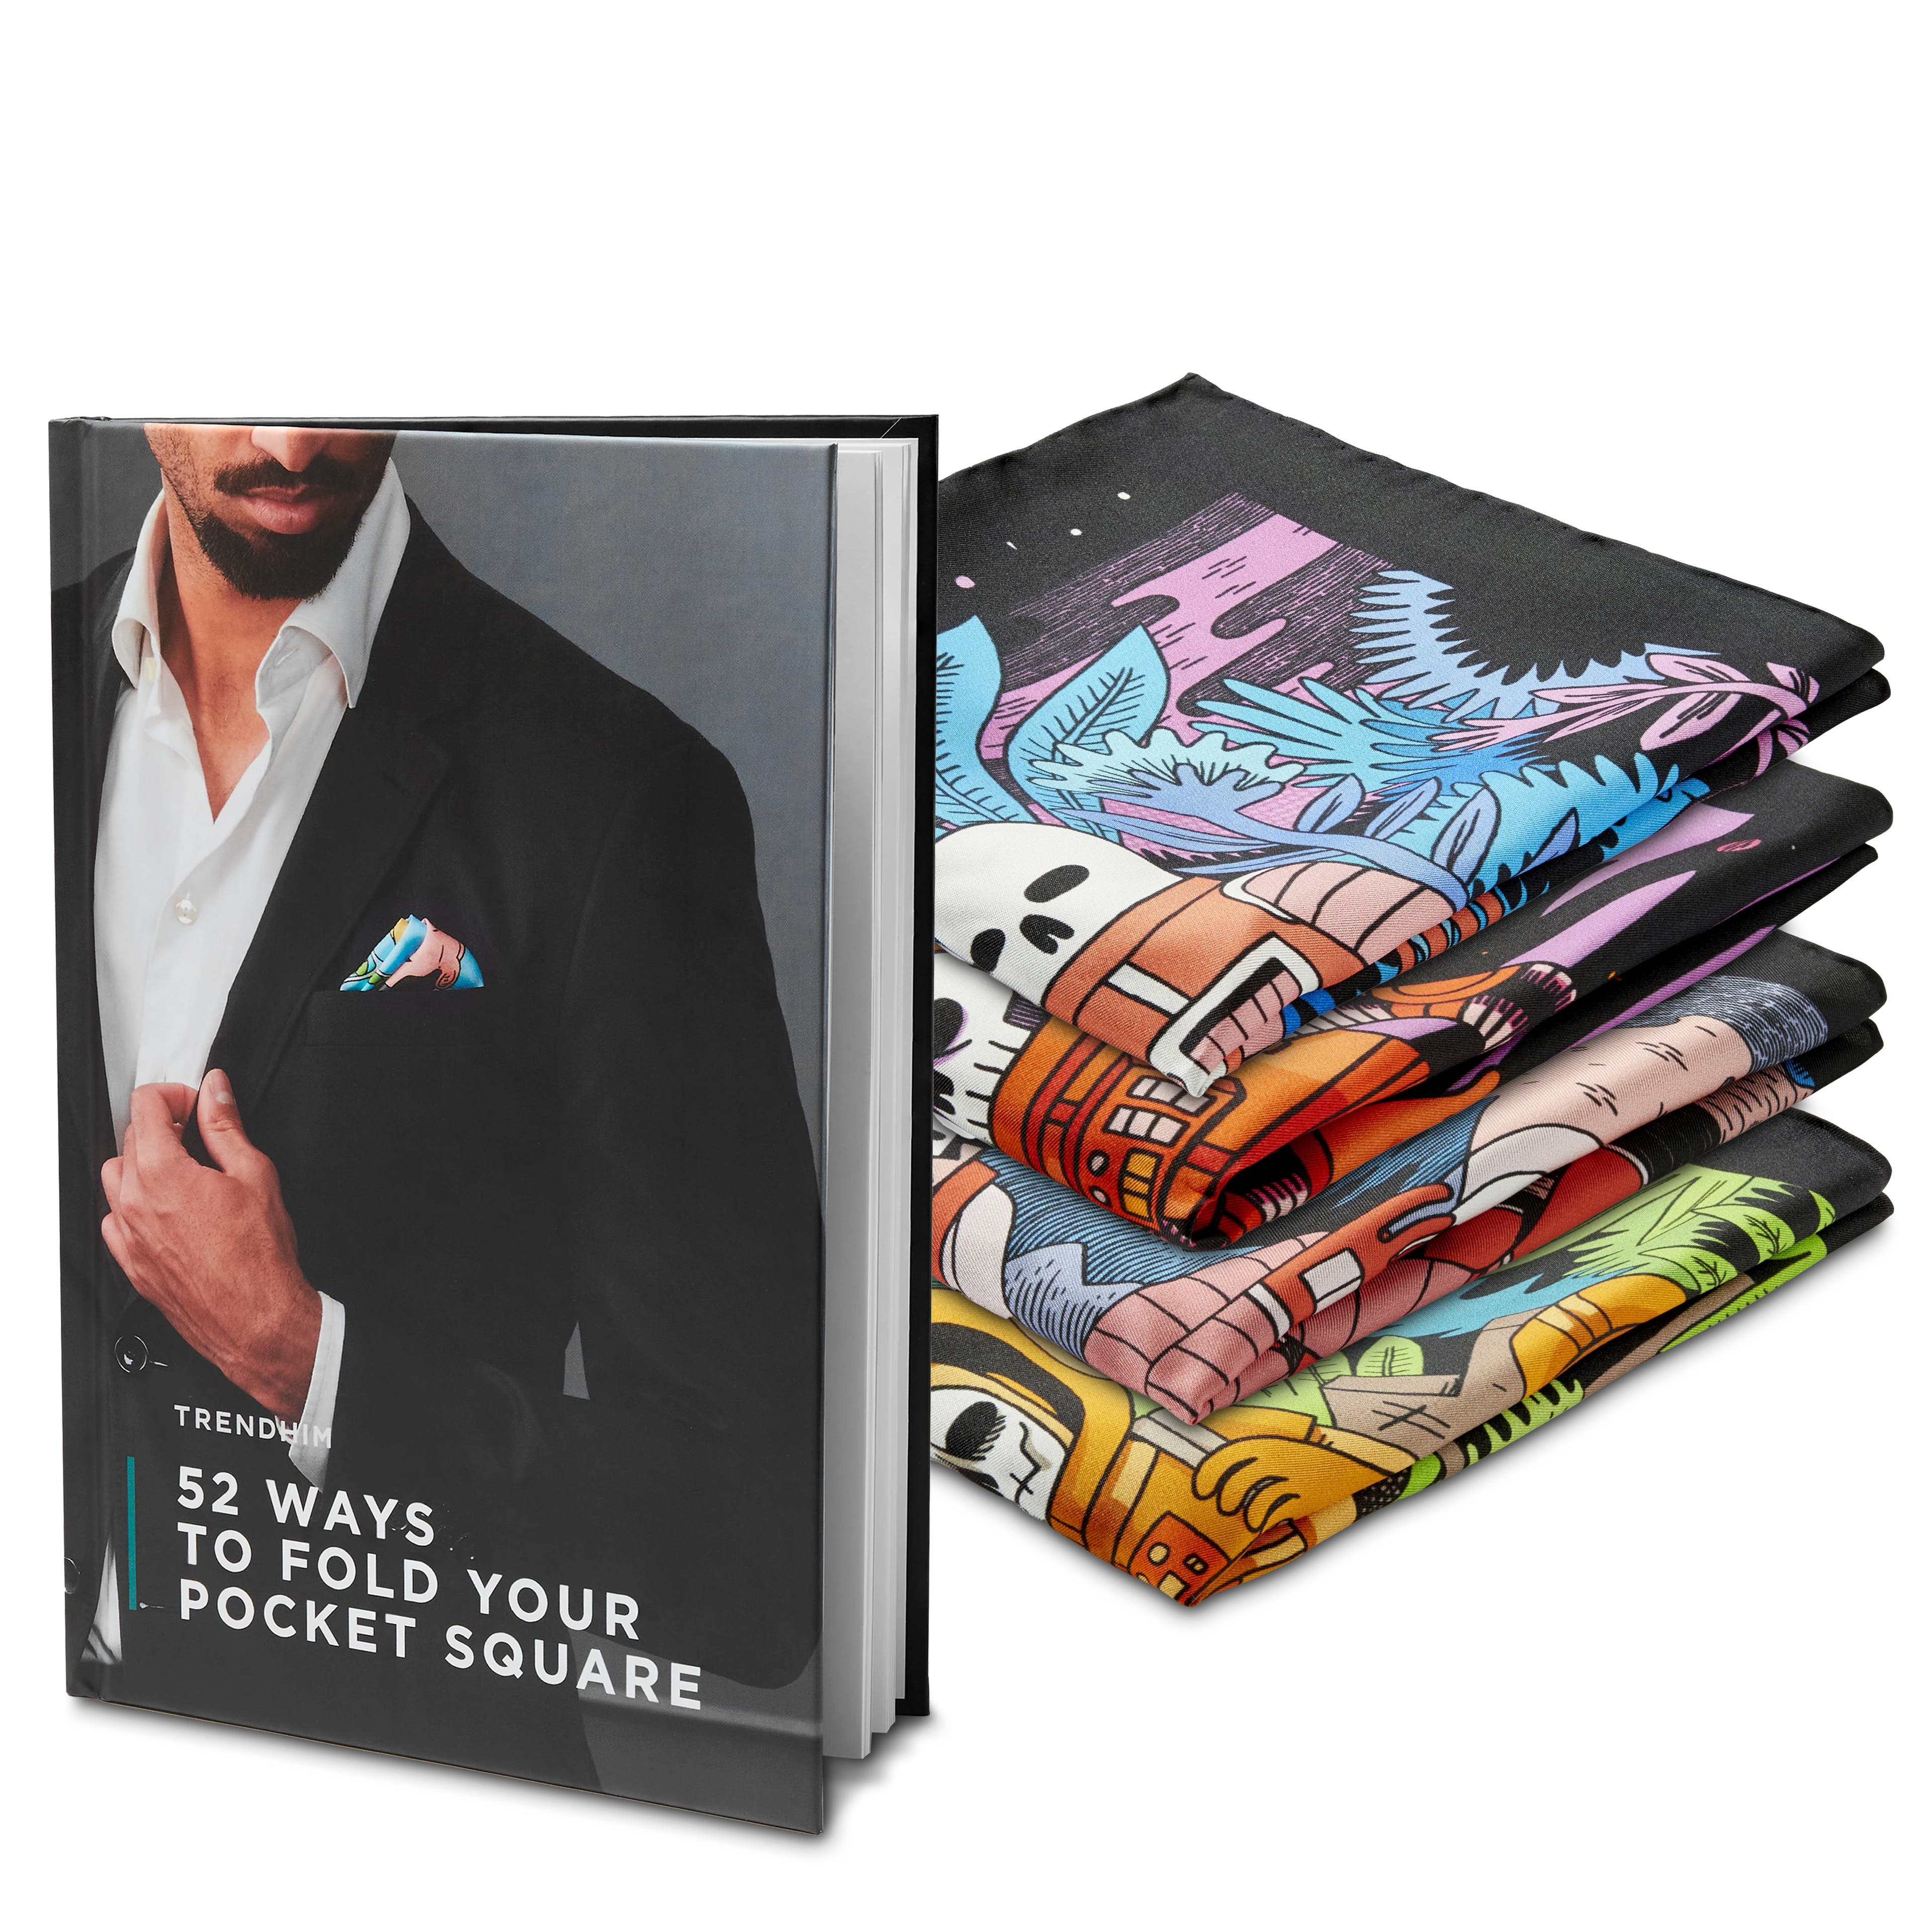 New Age Pocket Square Set and How-To-Fold Guidebook